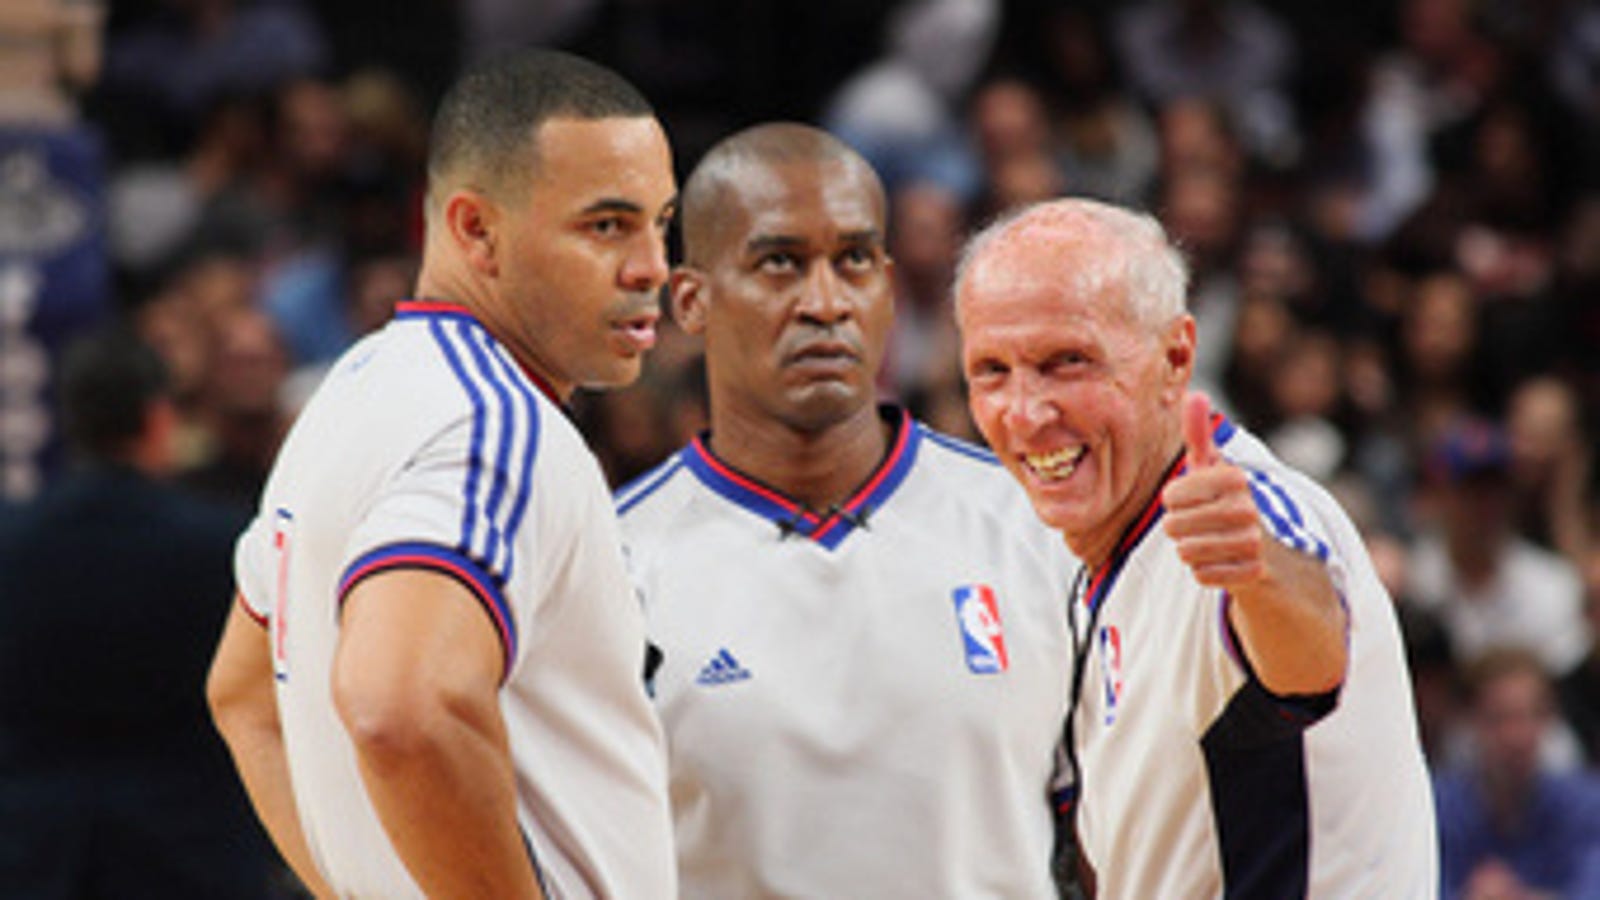 Economists Confirm That NBA Referees Are Biased